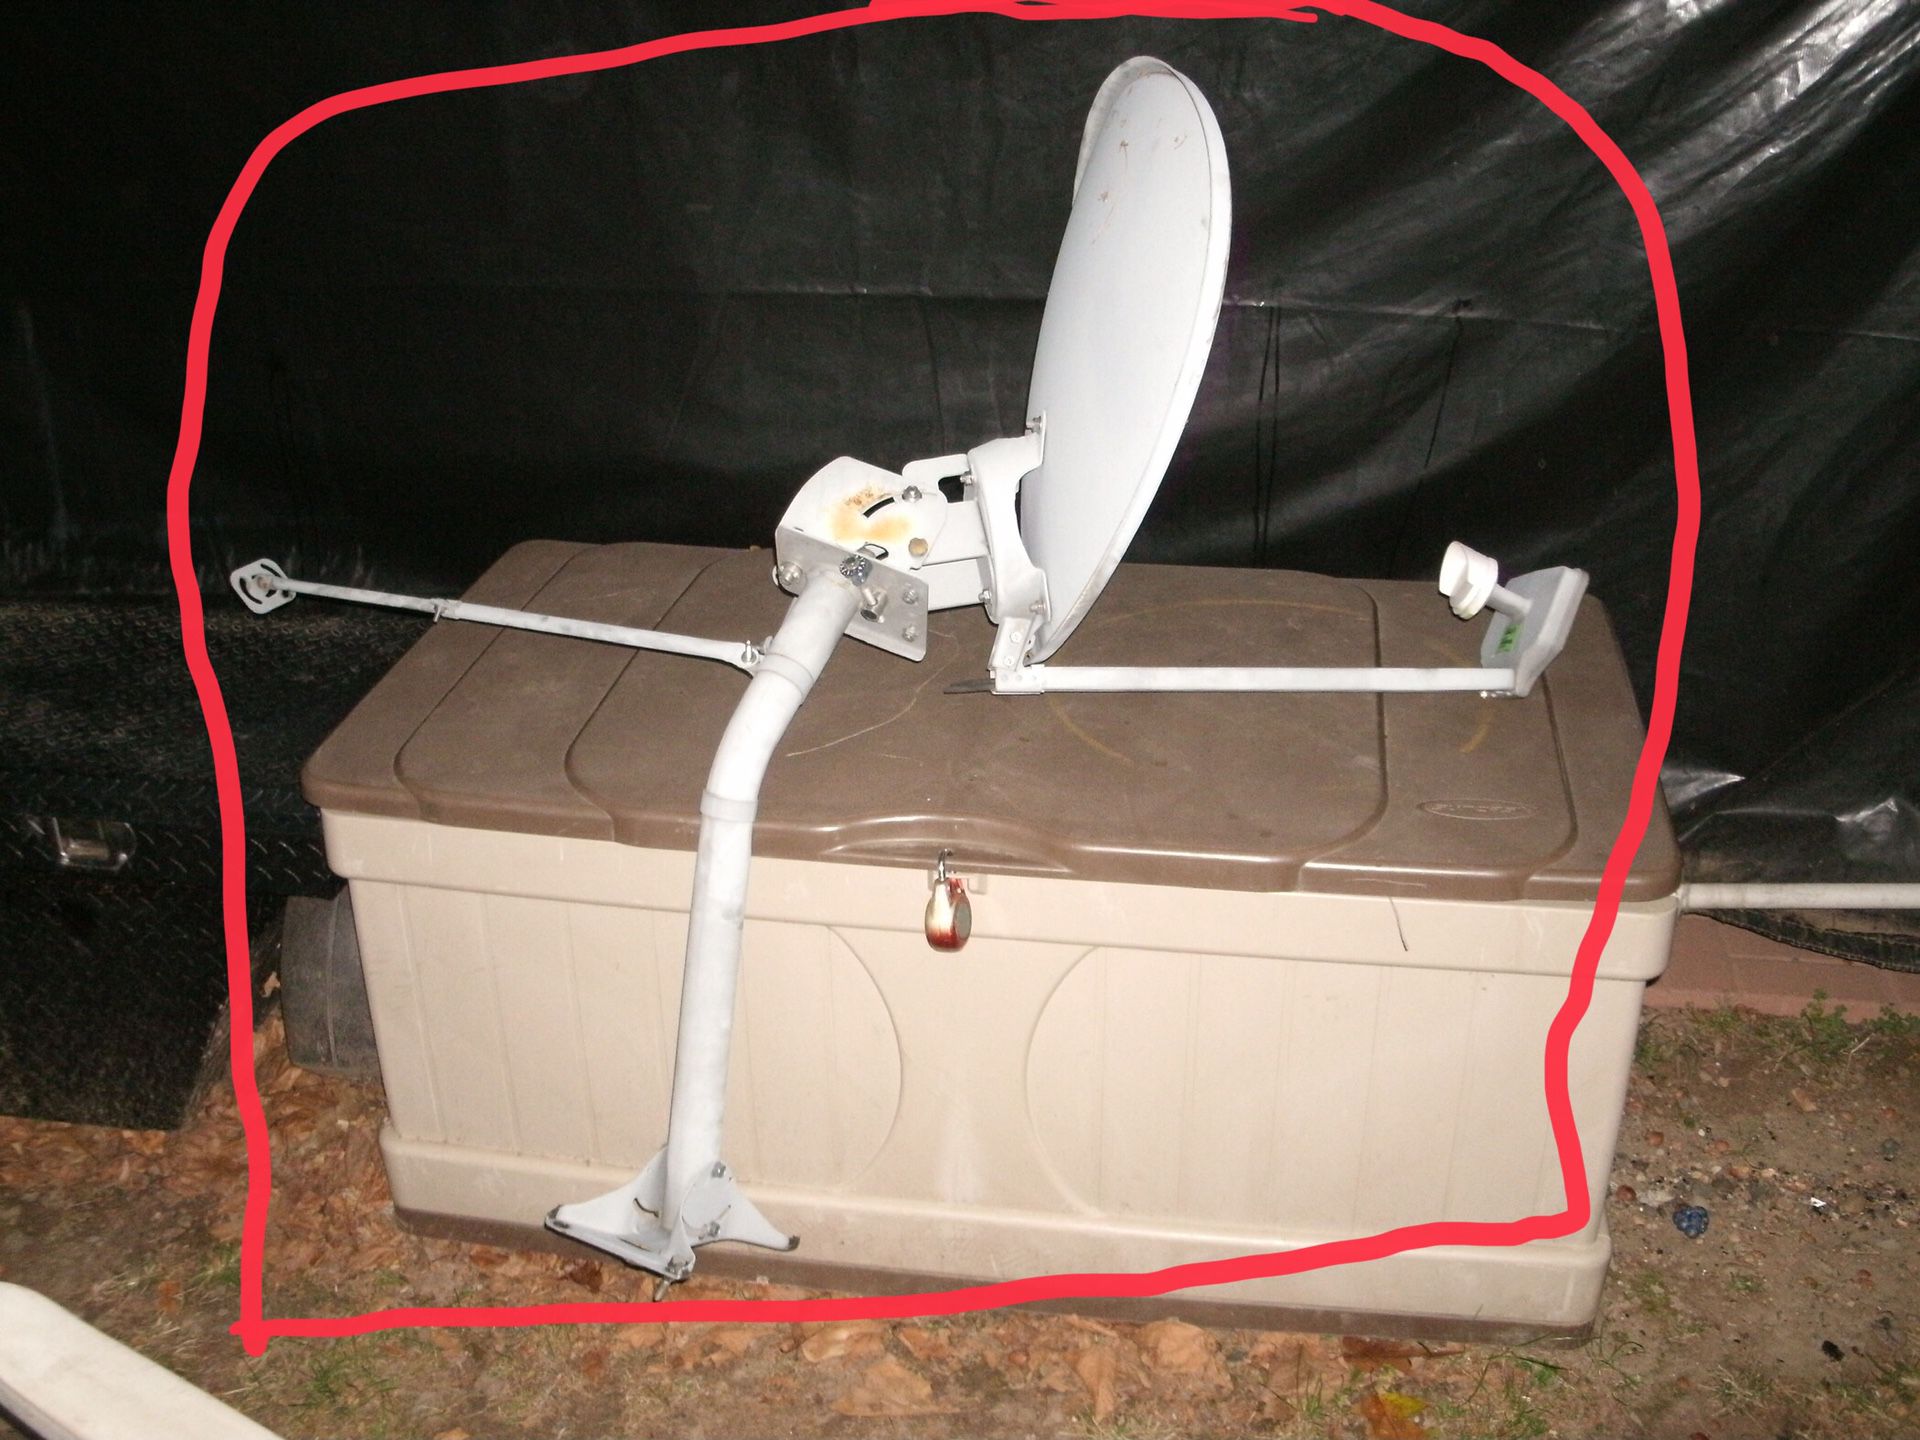 satellite dish I got for a project See pics that’s what you get you’re welcome to check out before buying I am in Bristol Pa 19007